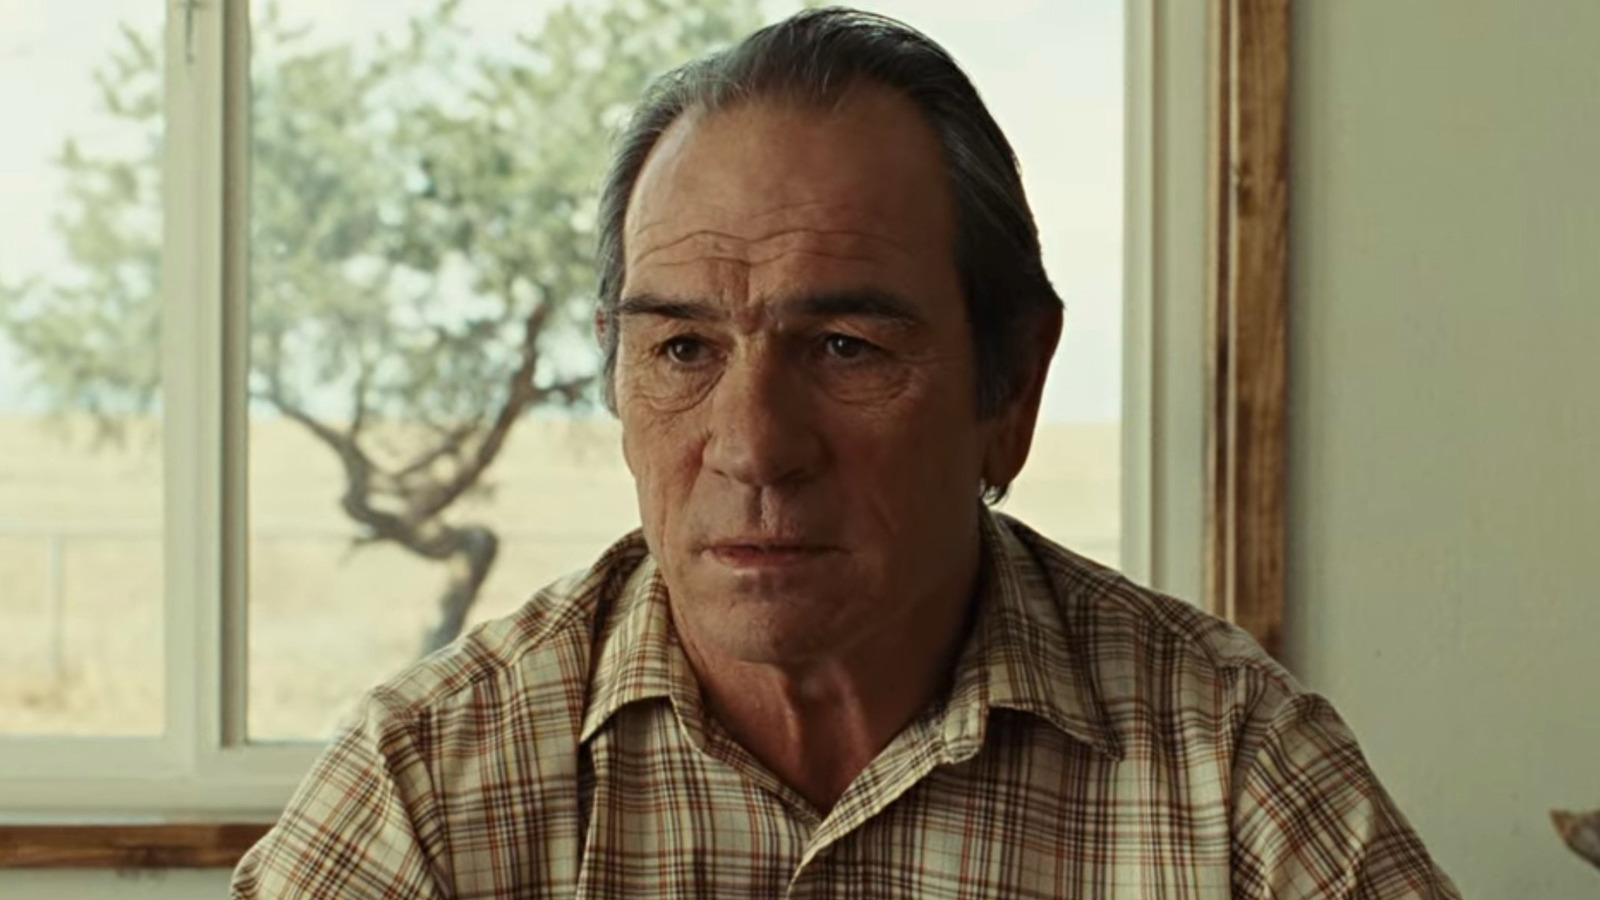 The Coen brothers struggled with a key aspect of Tommy Lee Jones' No Country For Old Men role